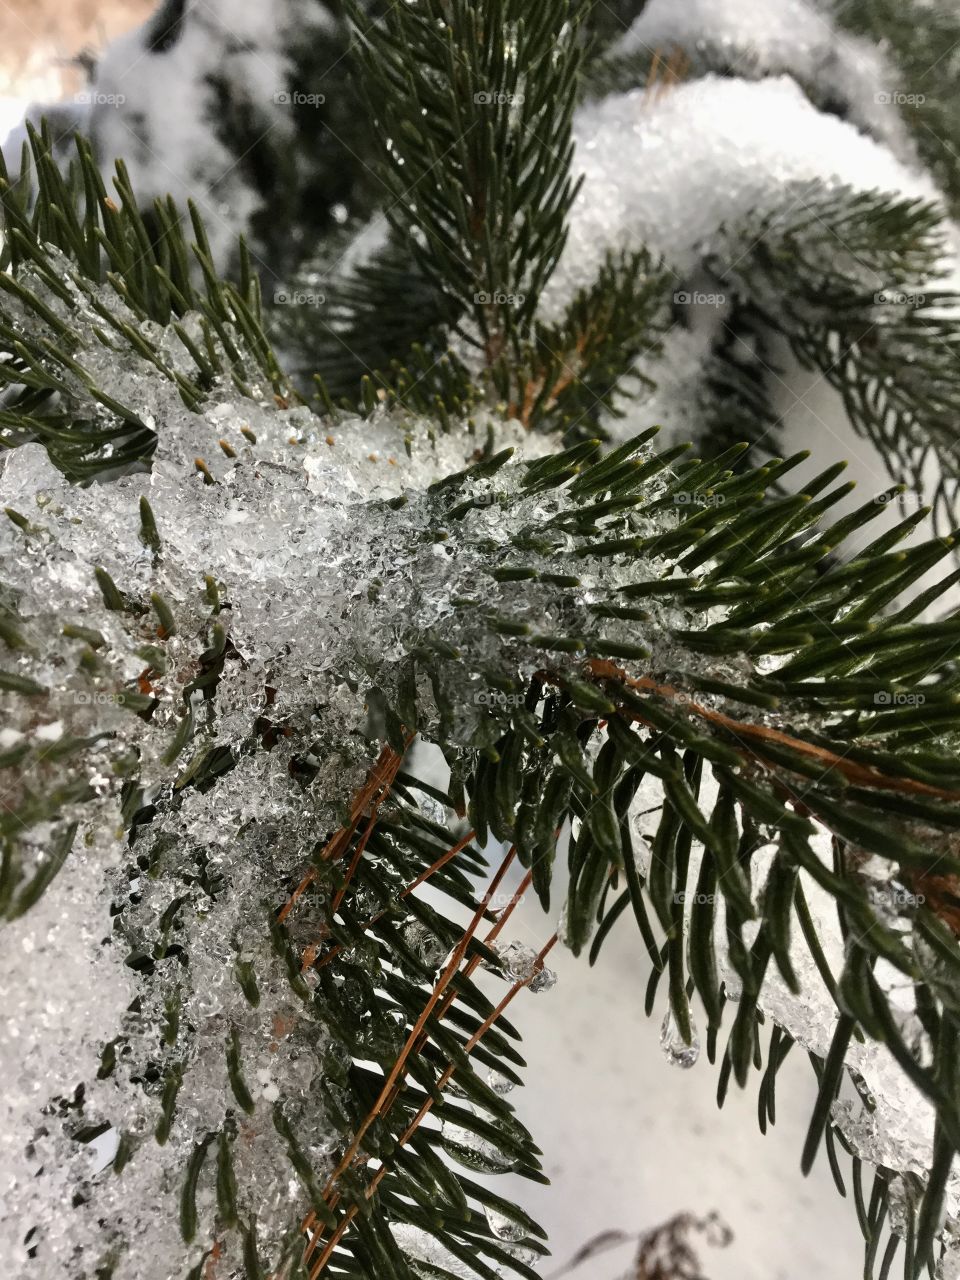 Crushed snow on a cold pine tree